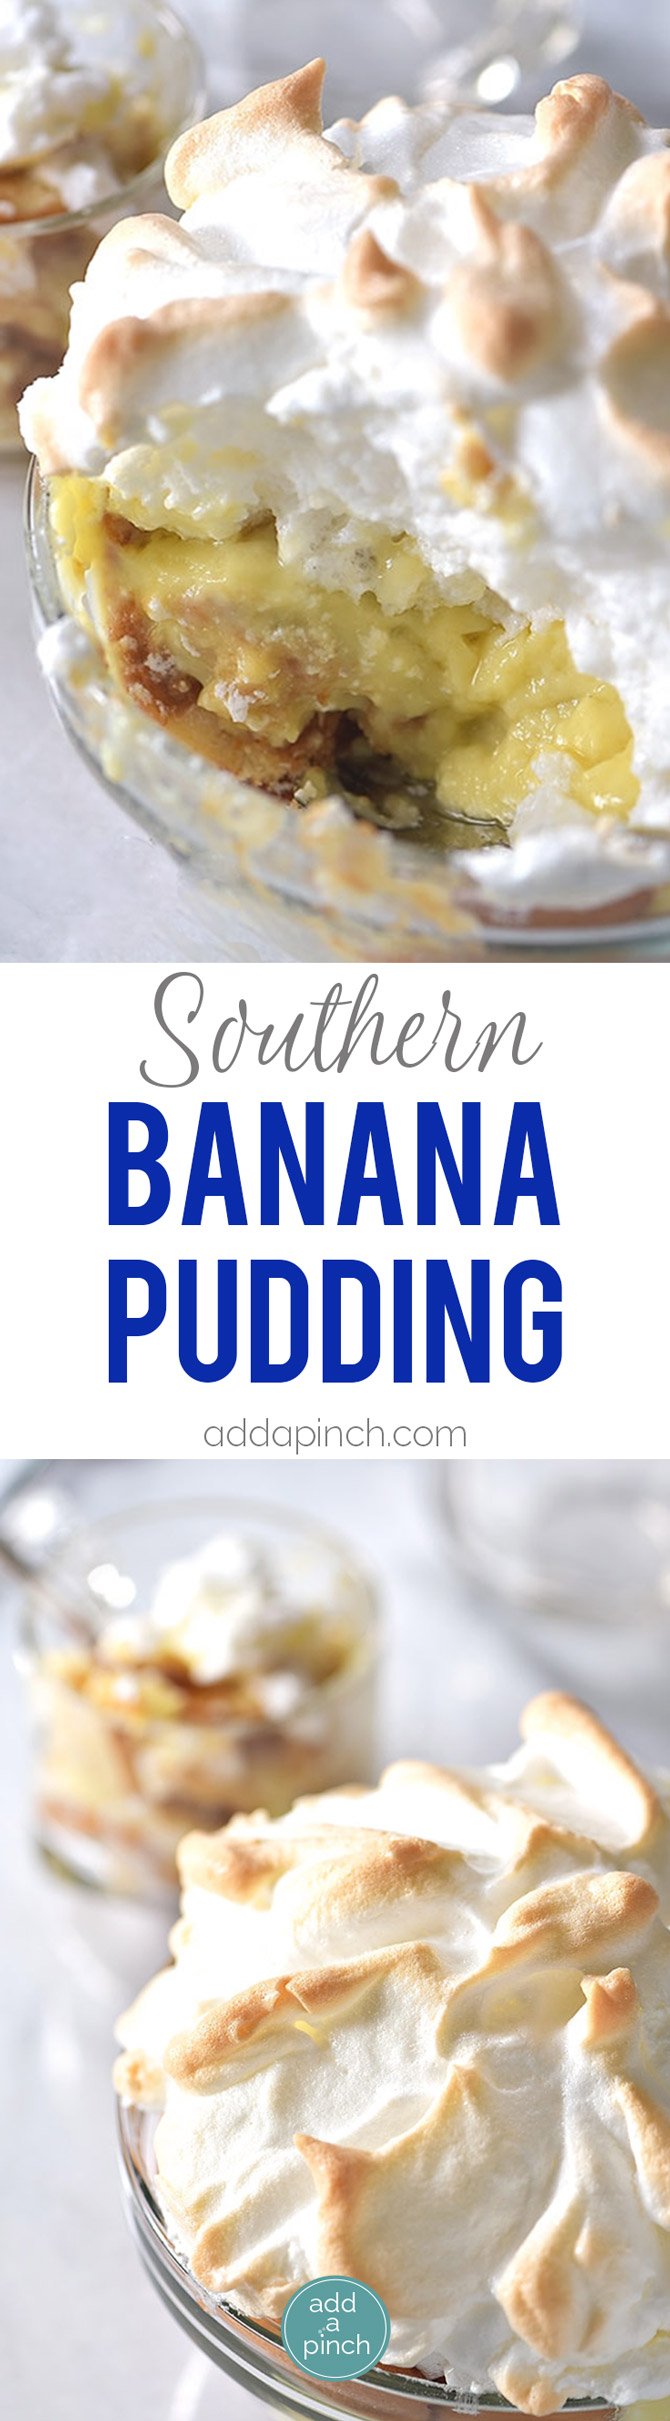 Southern Banana Pudding Recipe - This banana pudding recipe makes a classic, Southern dessert. An heirloom family recipe, this homemade banana pudding is an essential part of so many holidays and celebrations! // addapinch.com